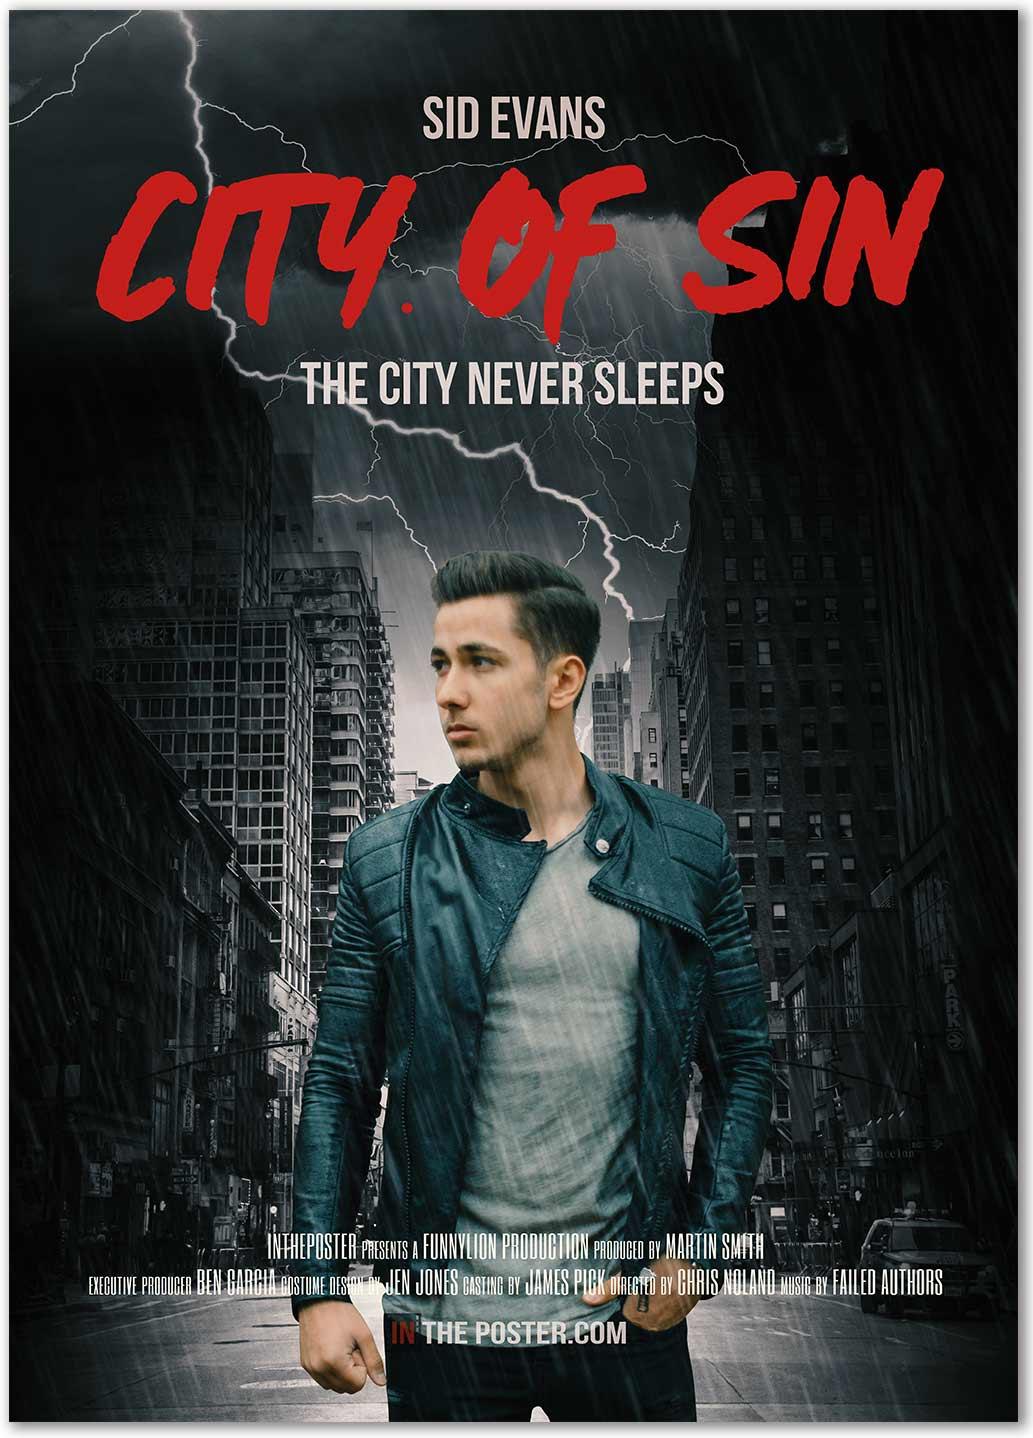 A film noir movie poster of a man in a city at night with lightning and rain